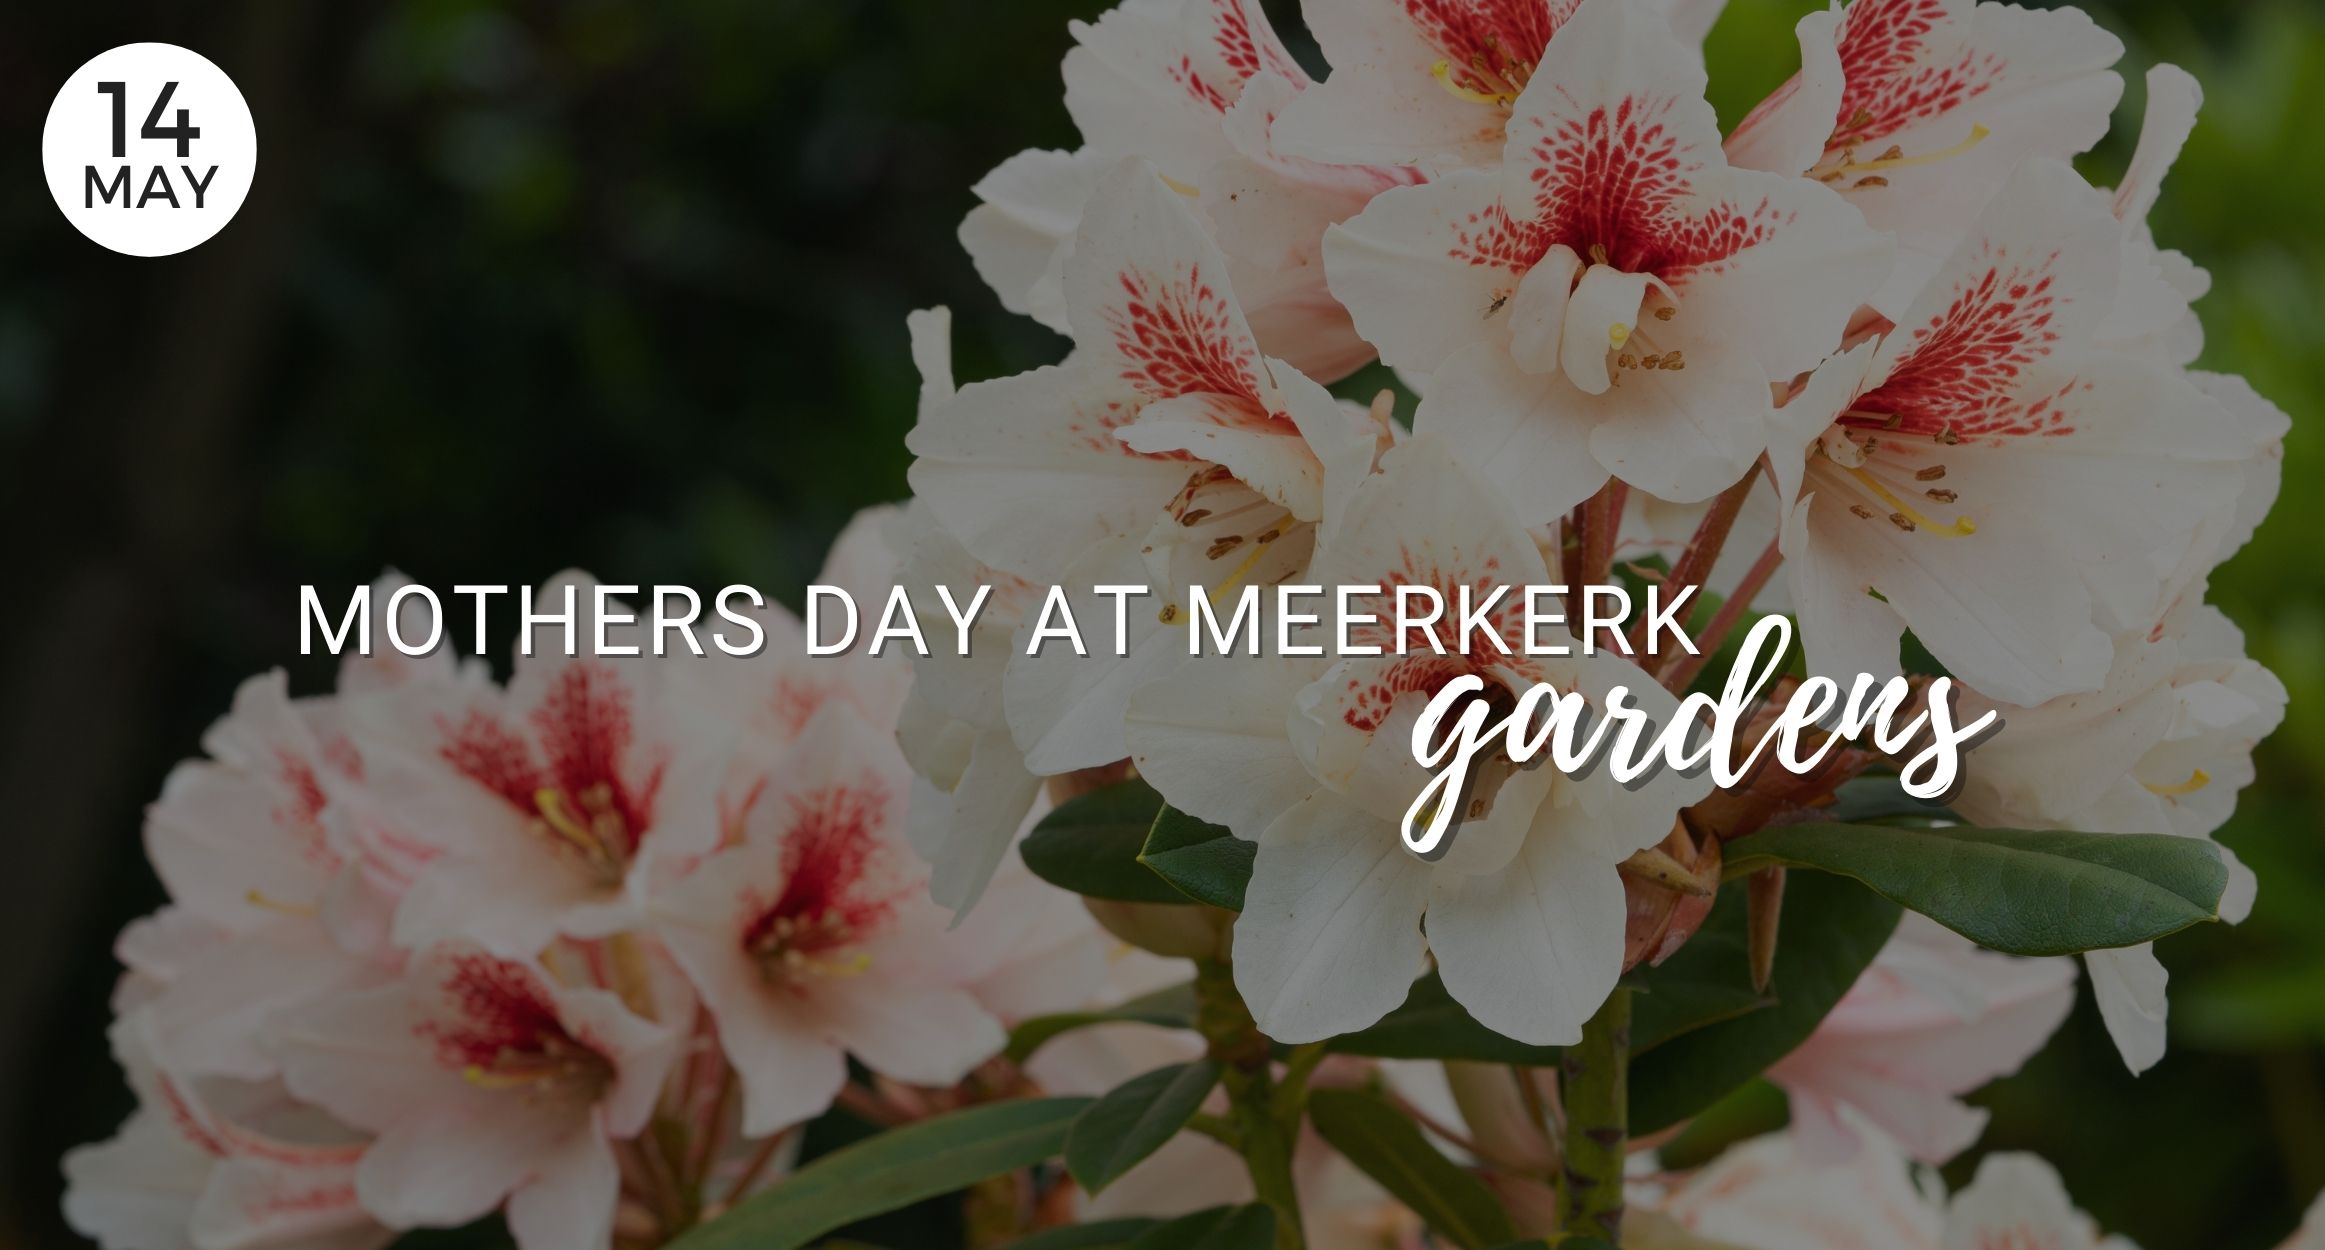 Mothers day at Meerkerk Gardens, Flowers, Special Day